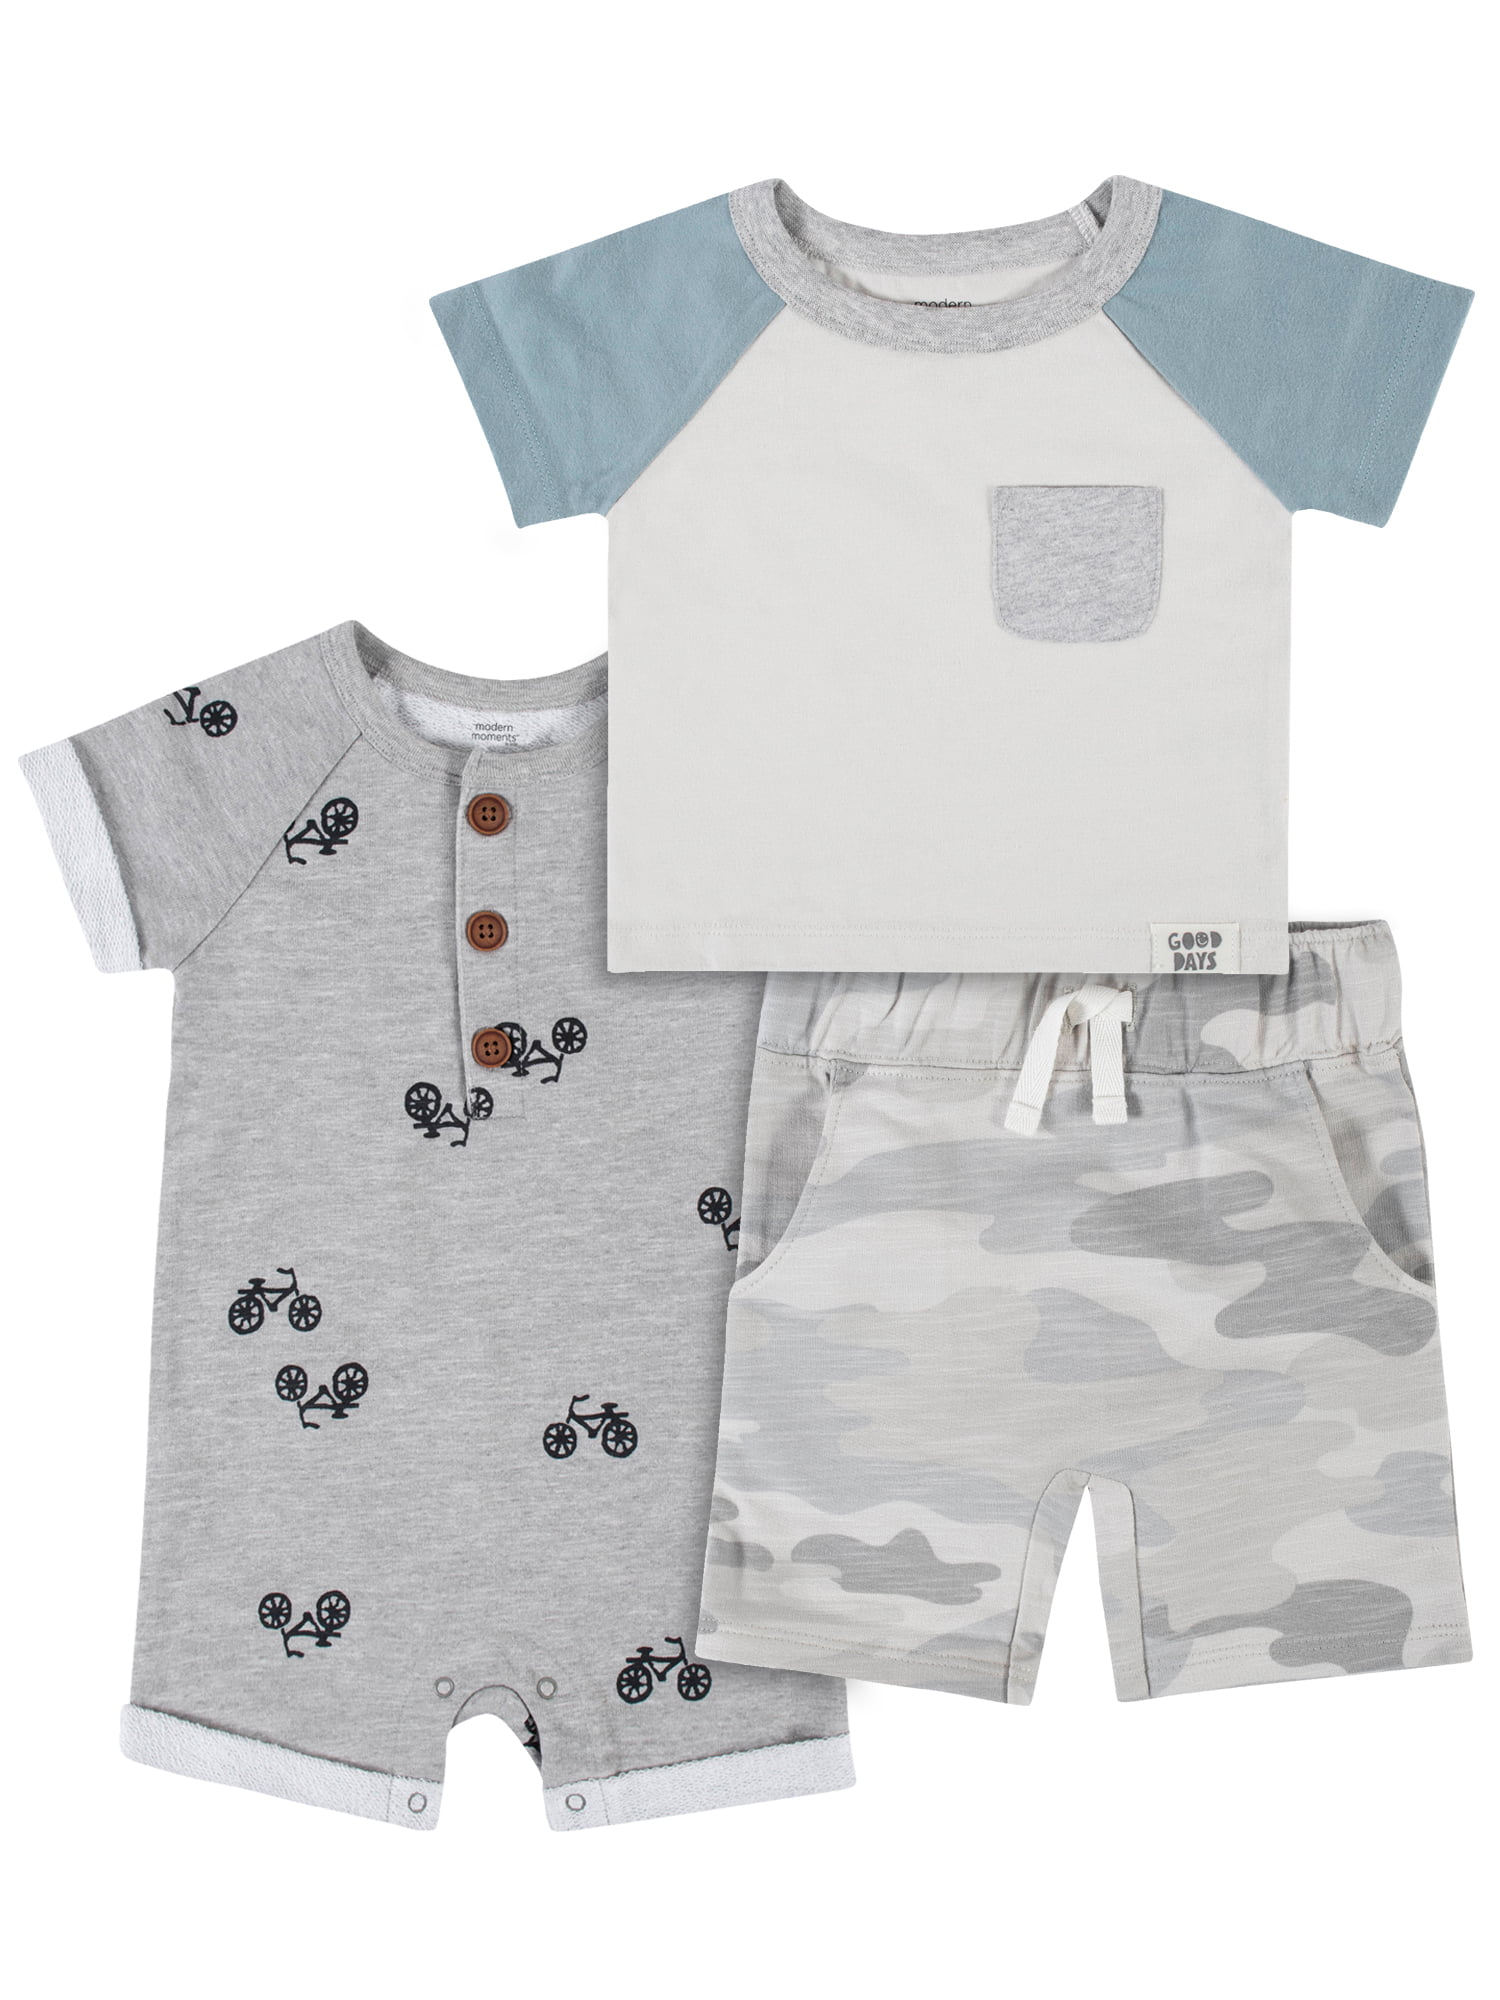 Baby Boy 9-12 Months Clothes Tracksuit/Hoody/Joggers/Romper/Shirt/Jumper/Dungare 